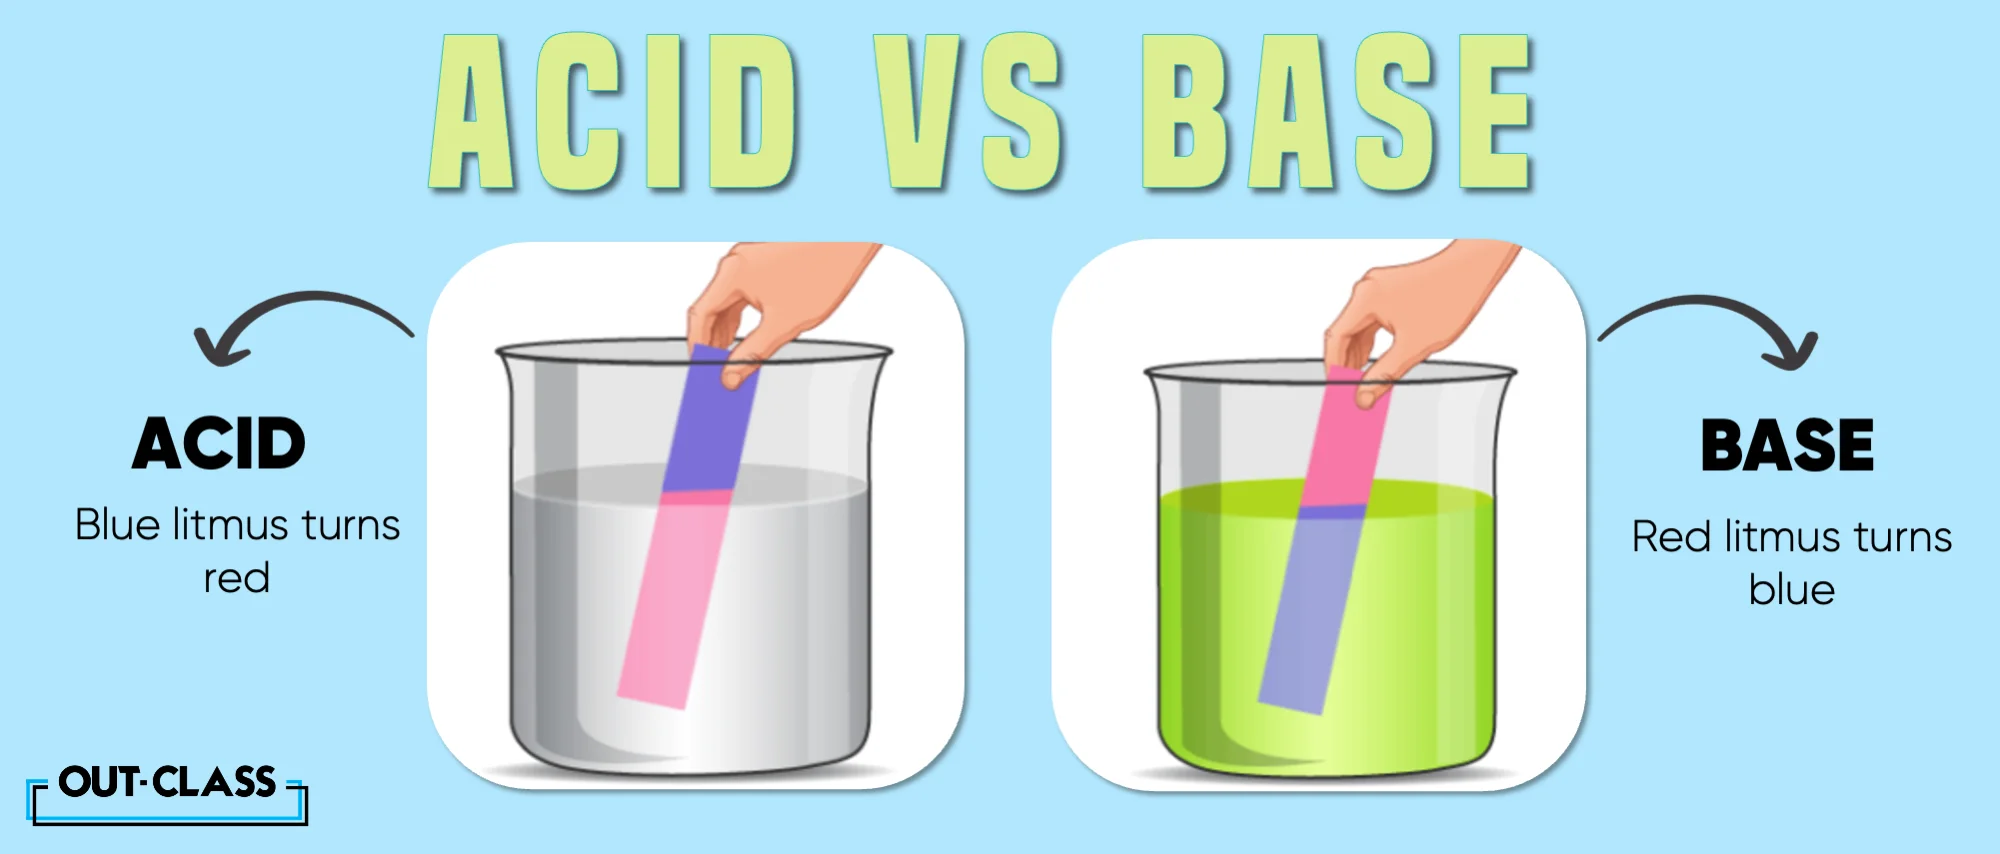 it shows the difference between acid and bases as well as the main key chemical difference that exists between them. But what it highlights most is the pH value that changes color of the litmus depending upon whether it is an acid or a base. 